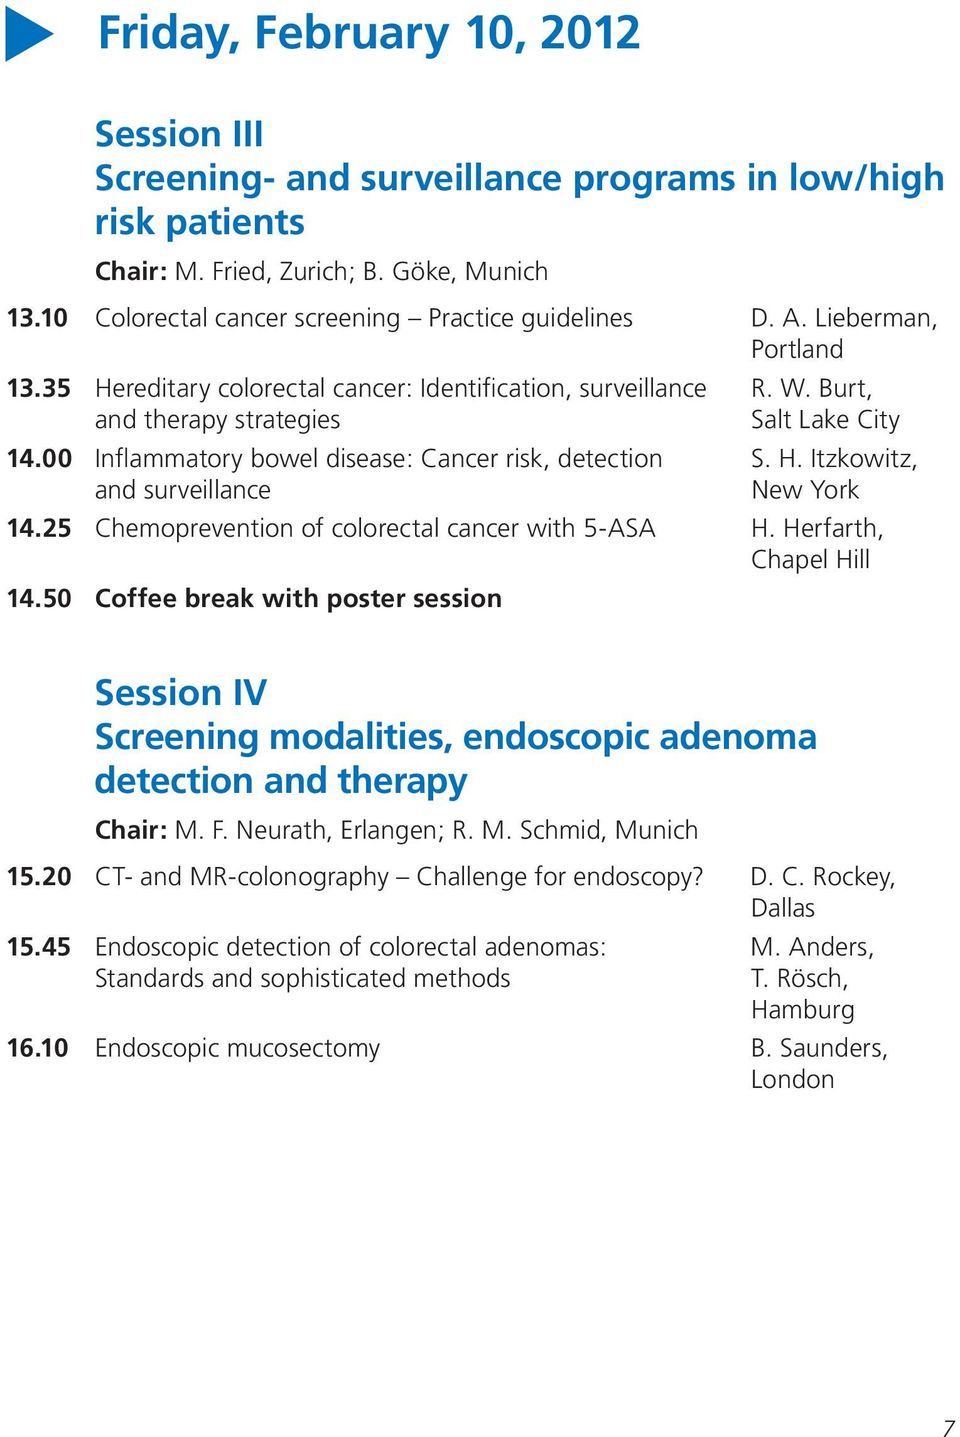 25 Chemoprevention of colorectal cancer with 5-ASA H. Herfarth, Chapel Hill 14.50 Coffee break with poster session Session IV Screening modalities, endoscopic adenoma detection and therapy Chair: M.